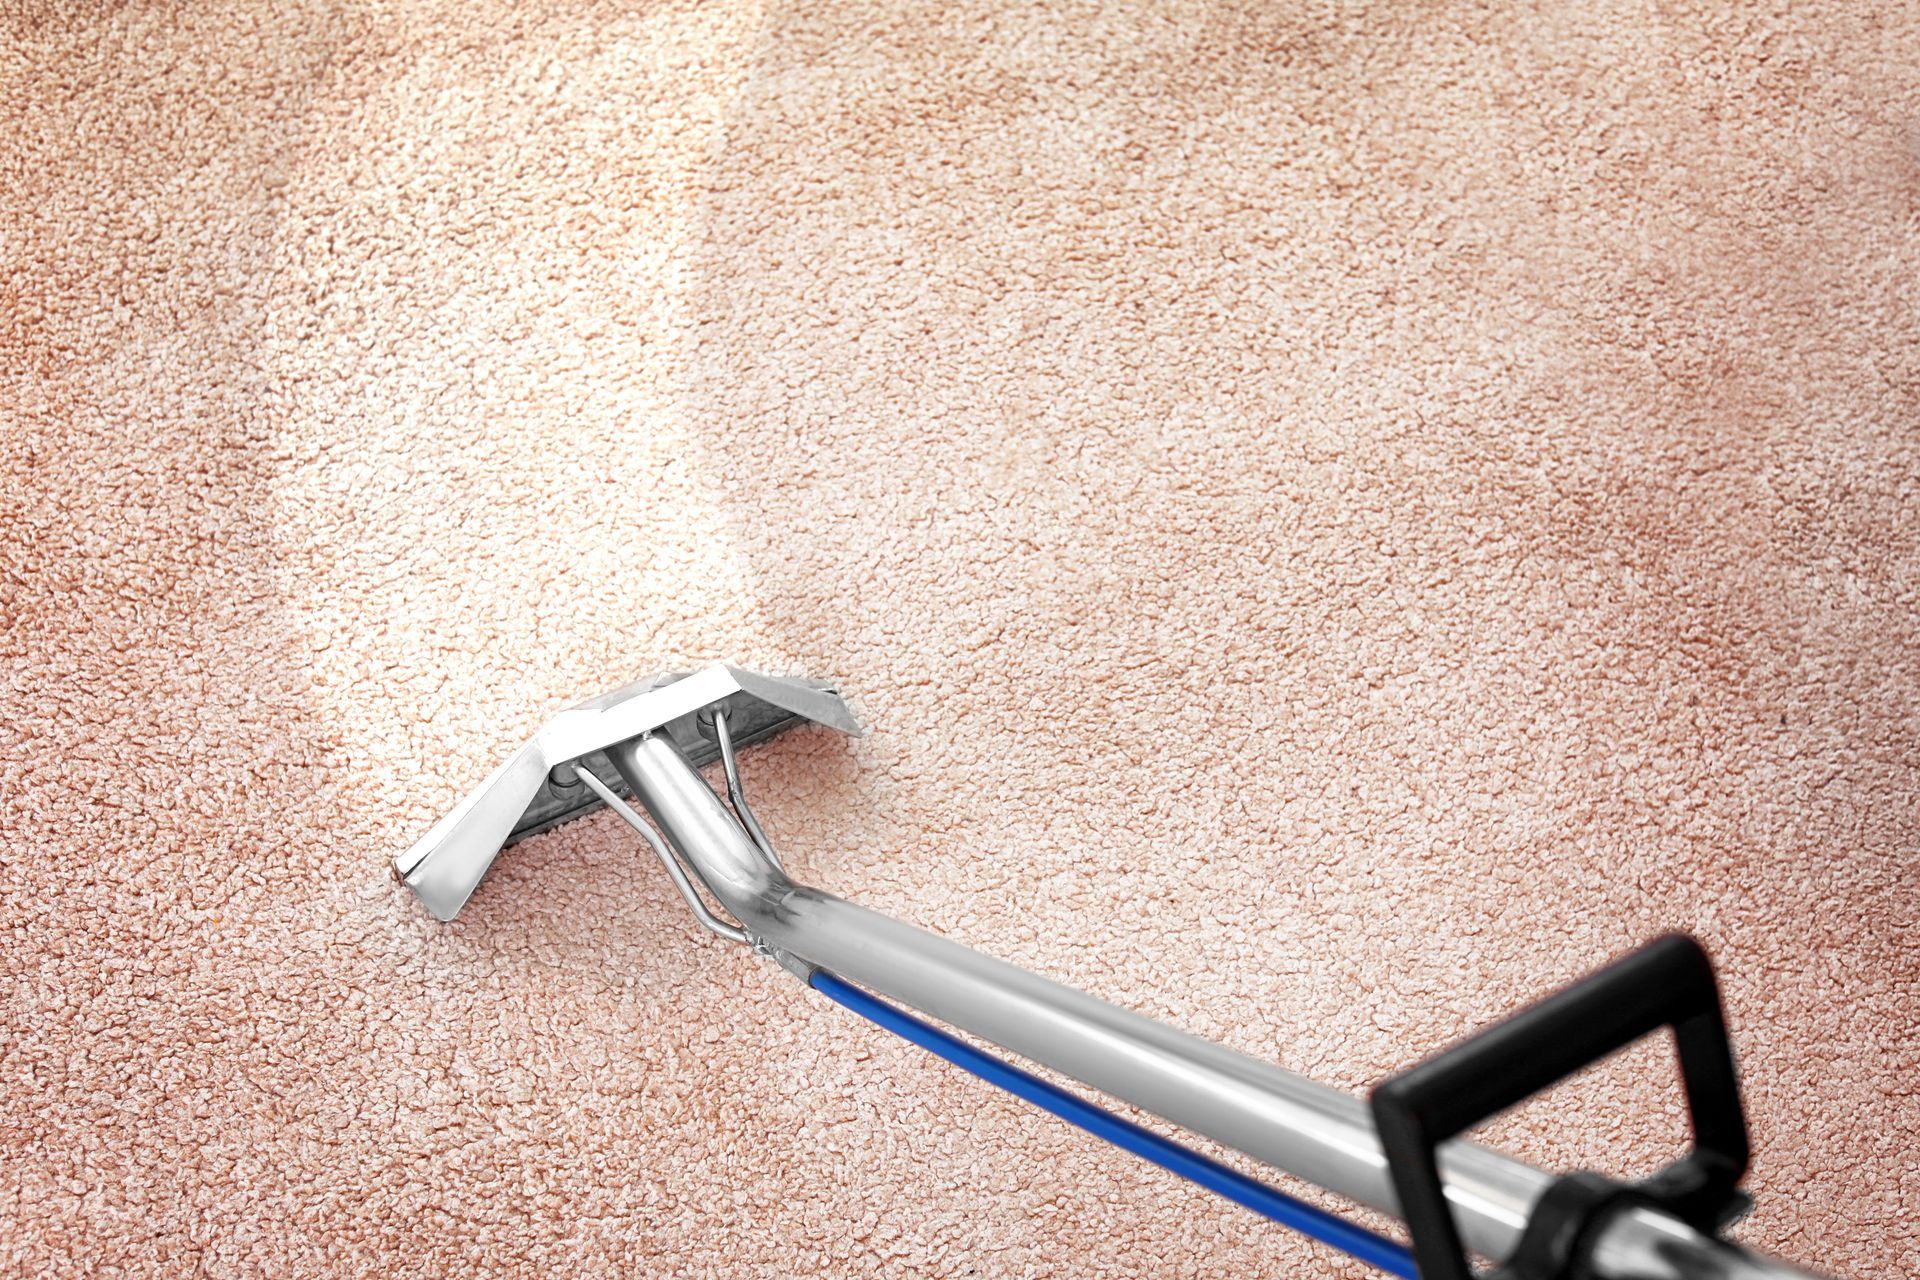 Professional Steamer that is leaving a clean streak of carpet as the cleaner steams professionally.